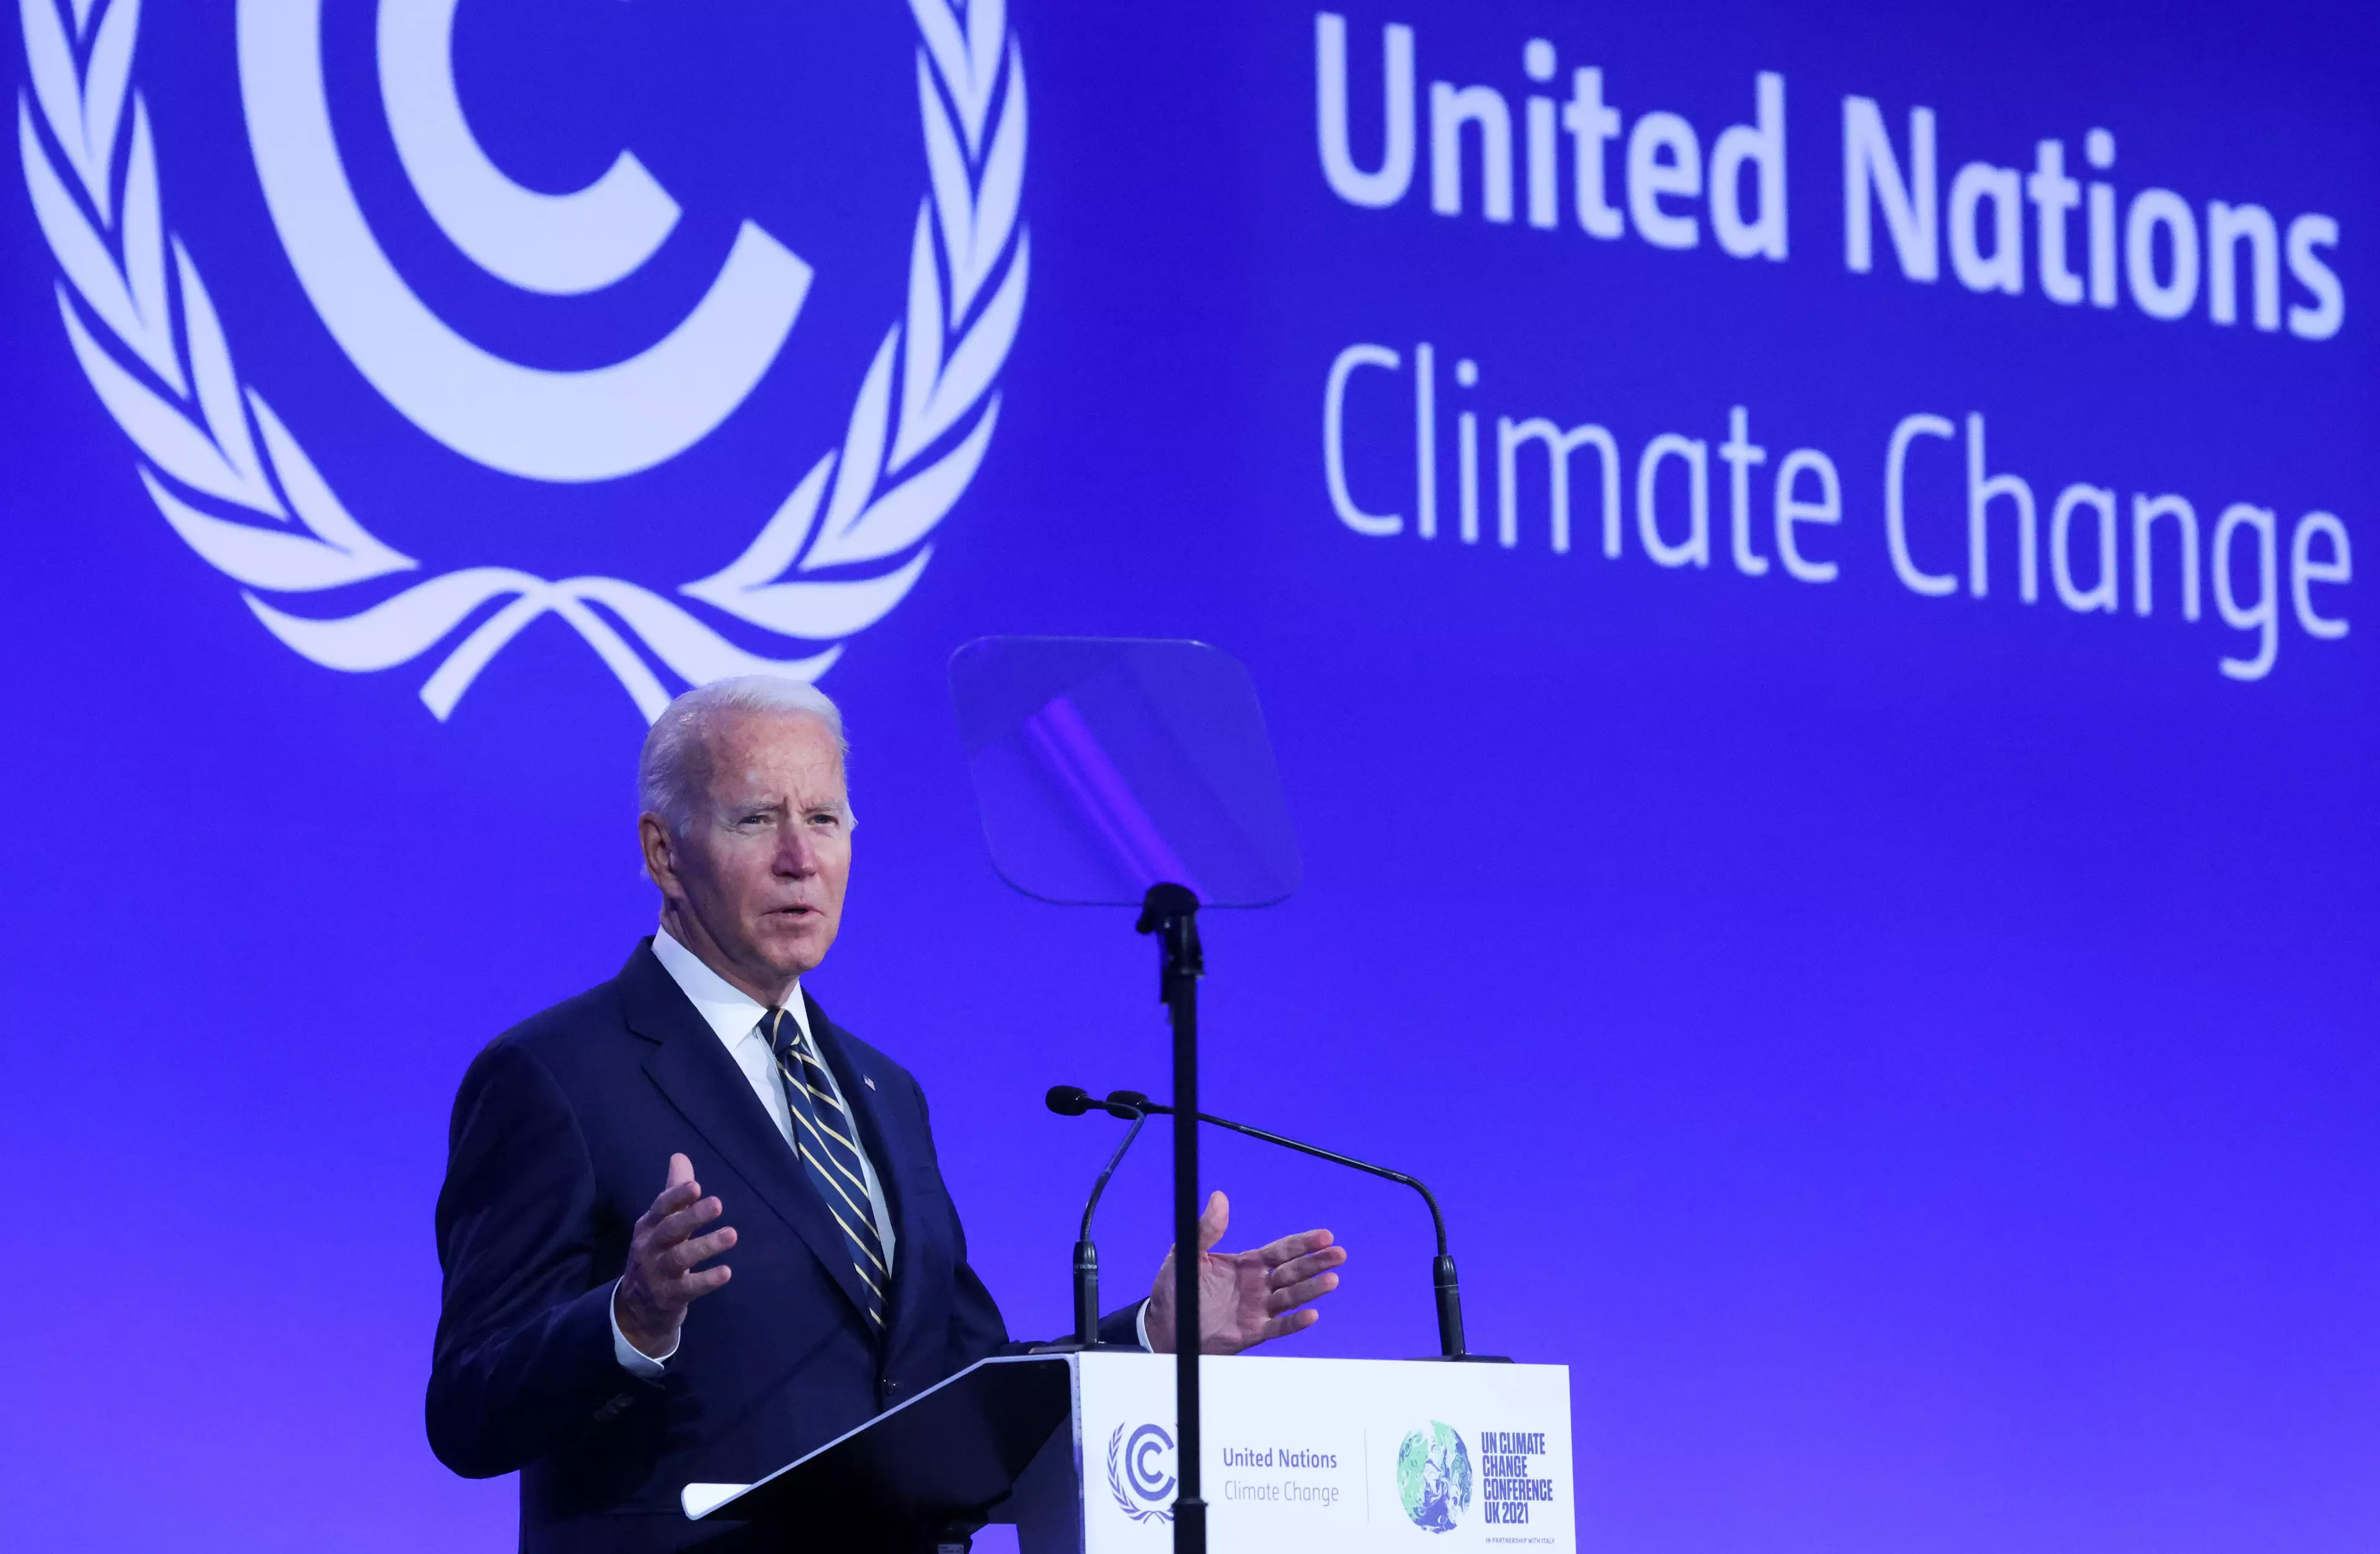 Biden urged world leaders to 'get to work' tackling climate change.